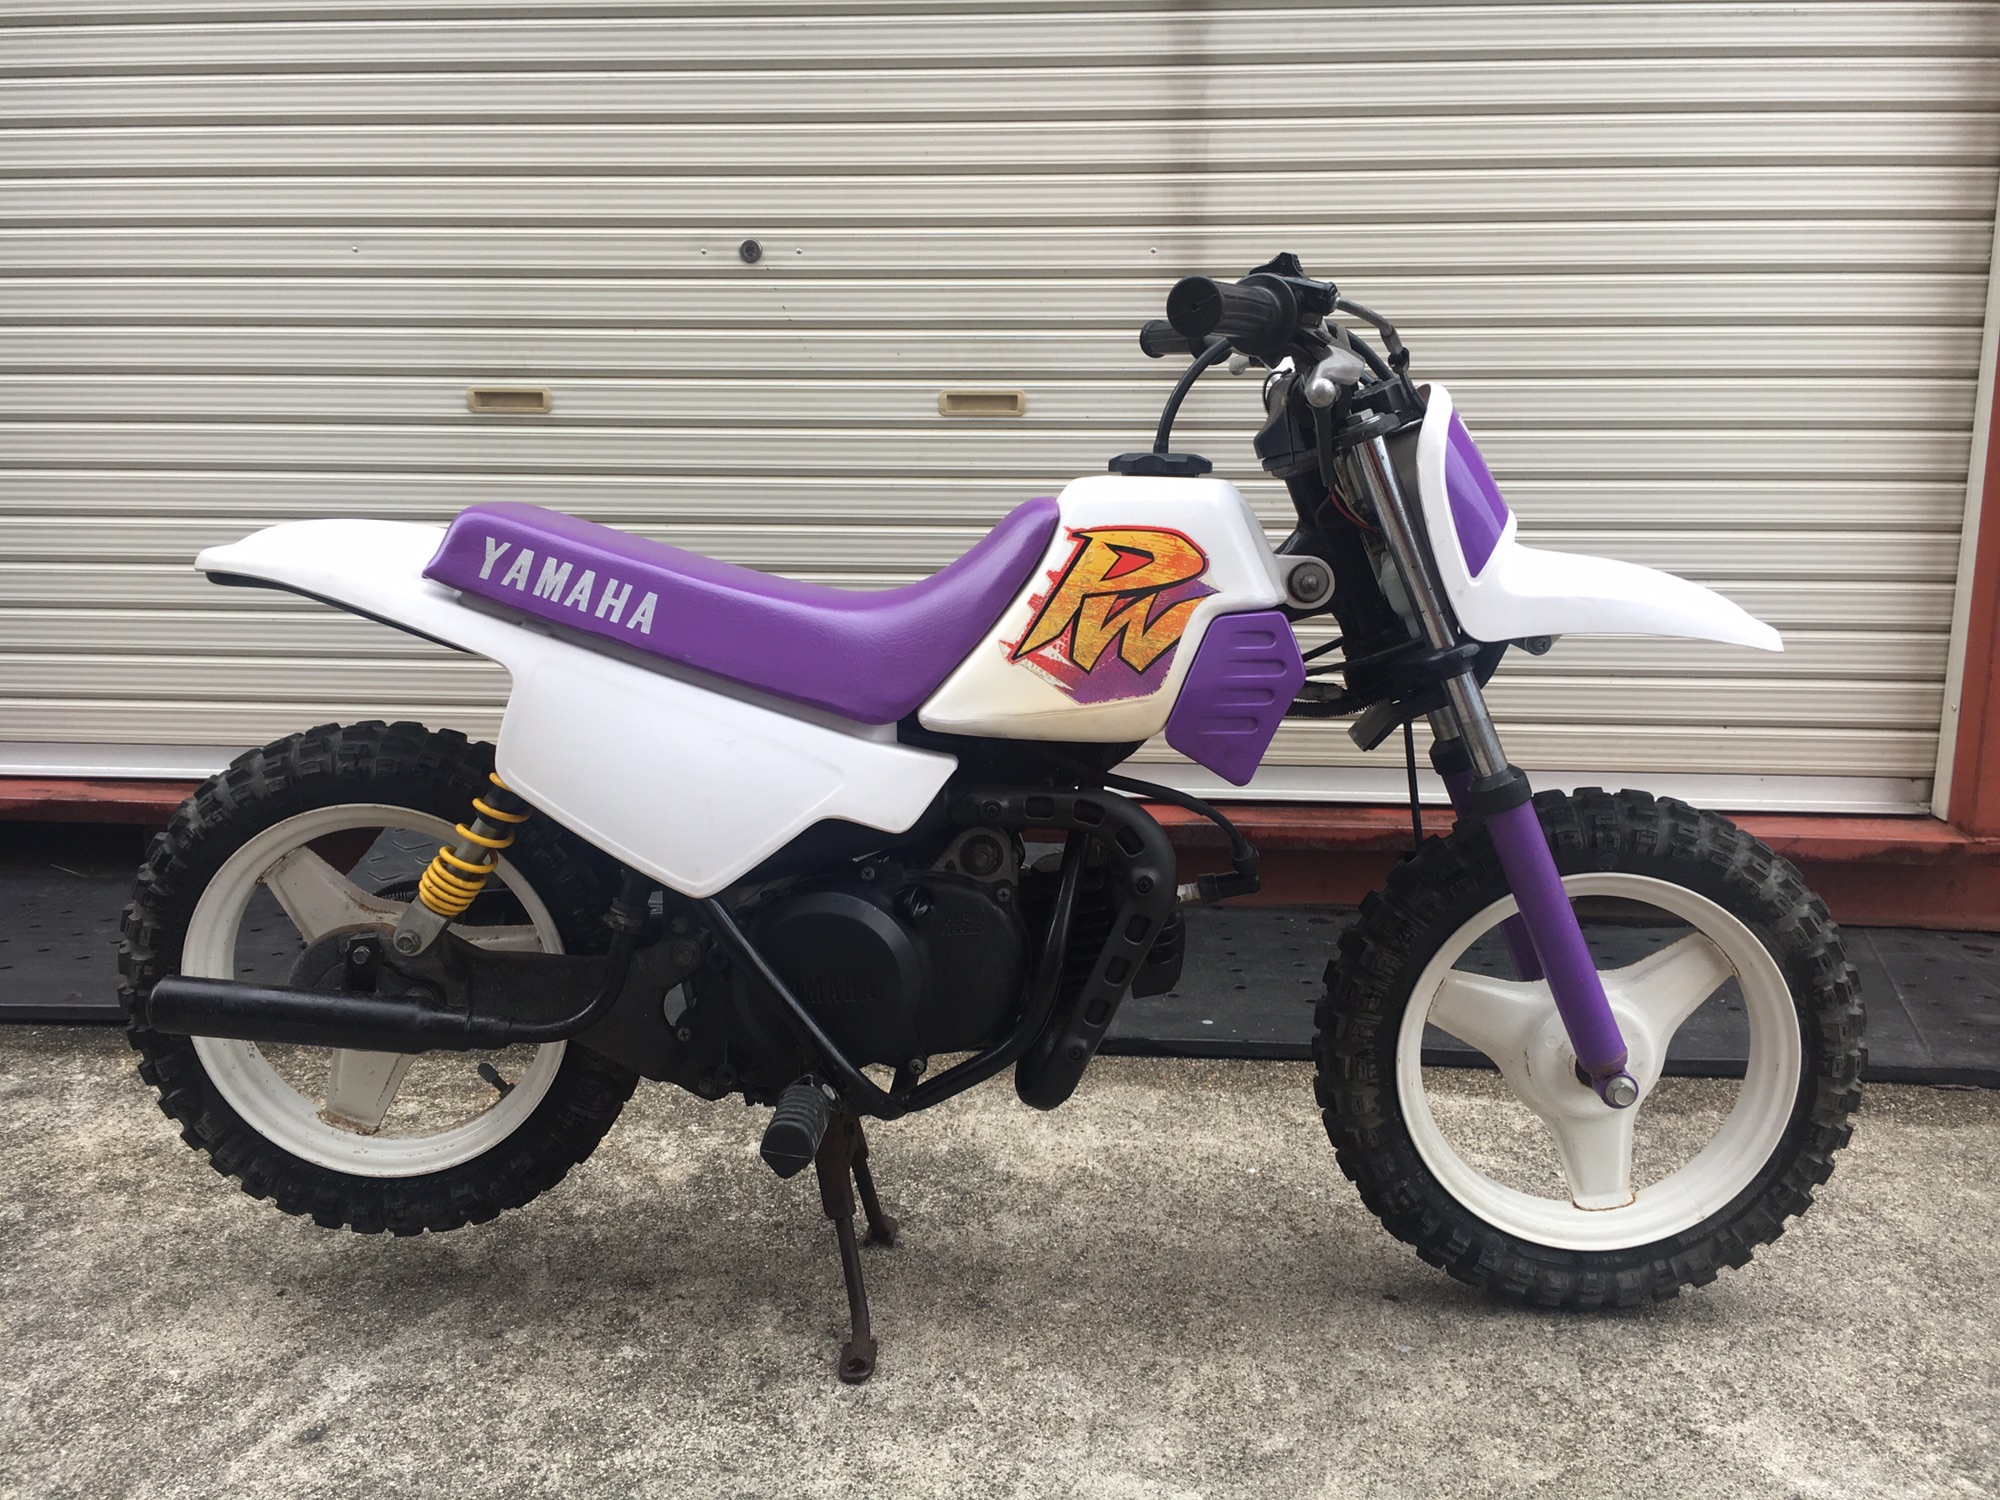 PW50 エンジンOH ピストン、キャブ新品 SOLD OUT10万円 | 三重 ...